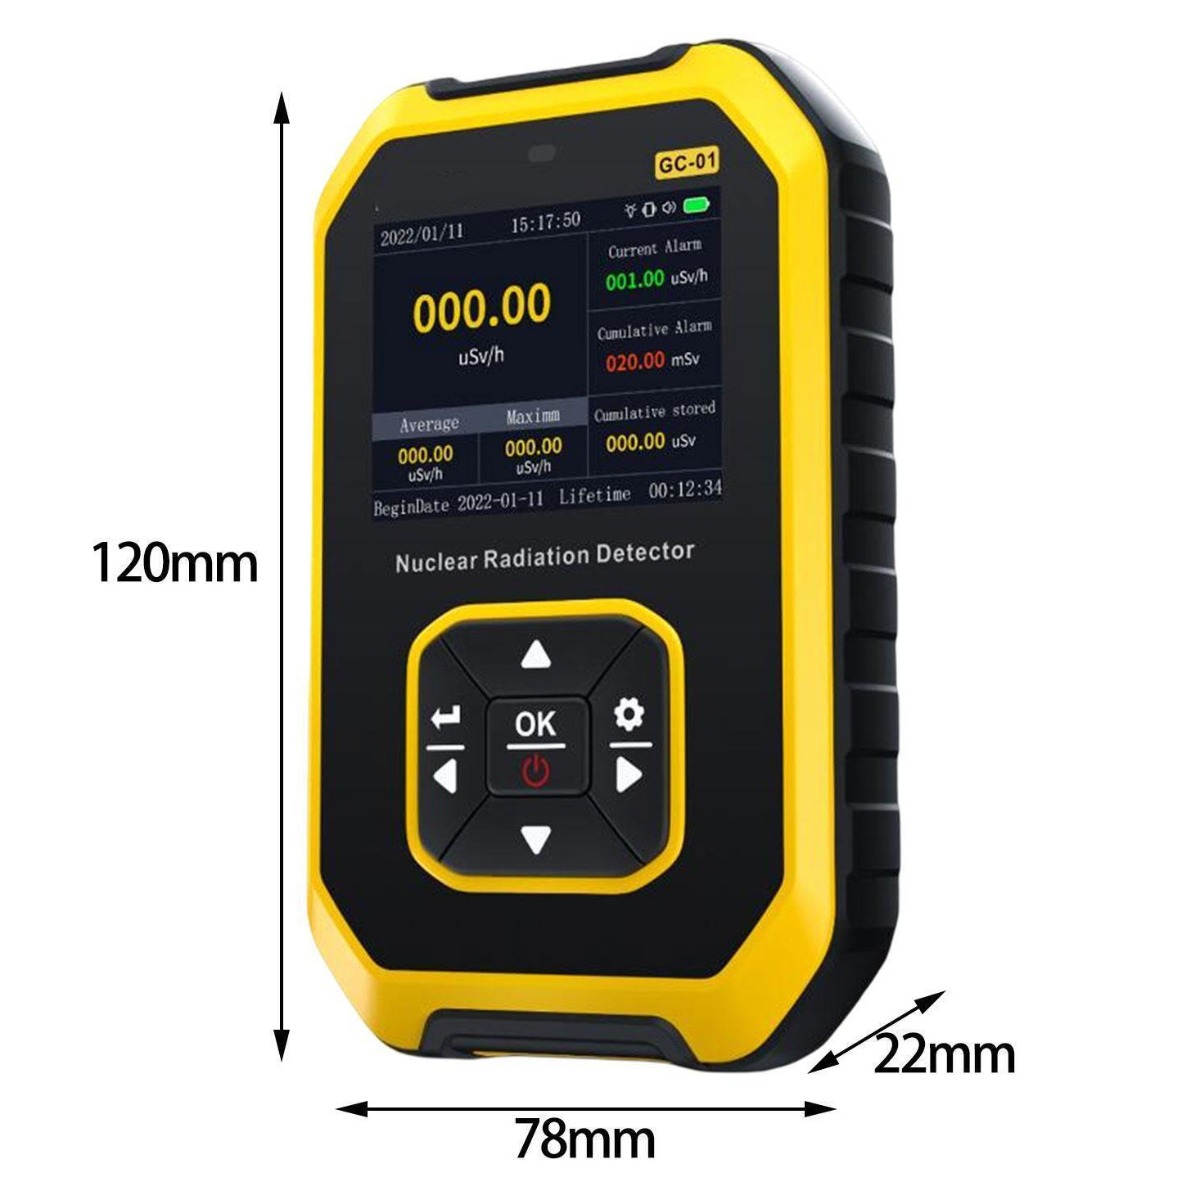 GC-01 Geiger Counter Dimensions